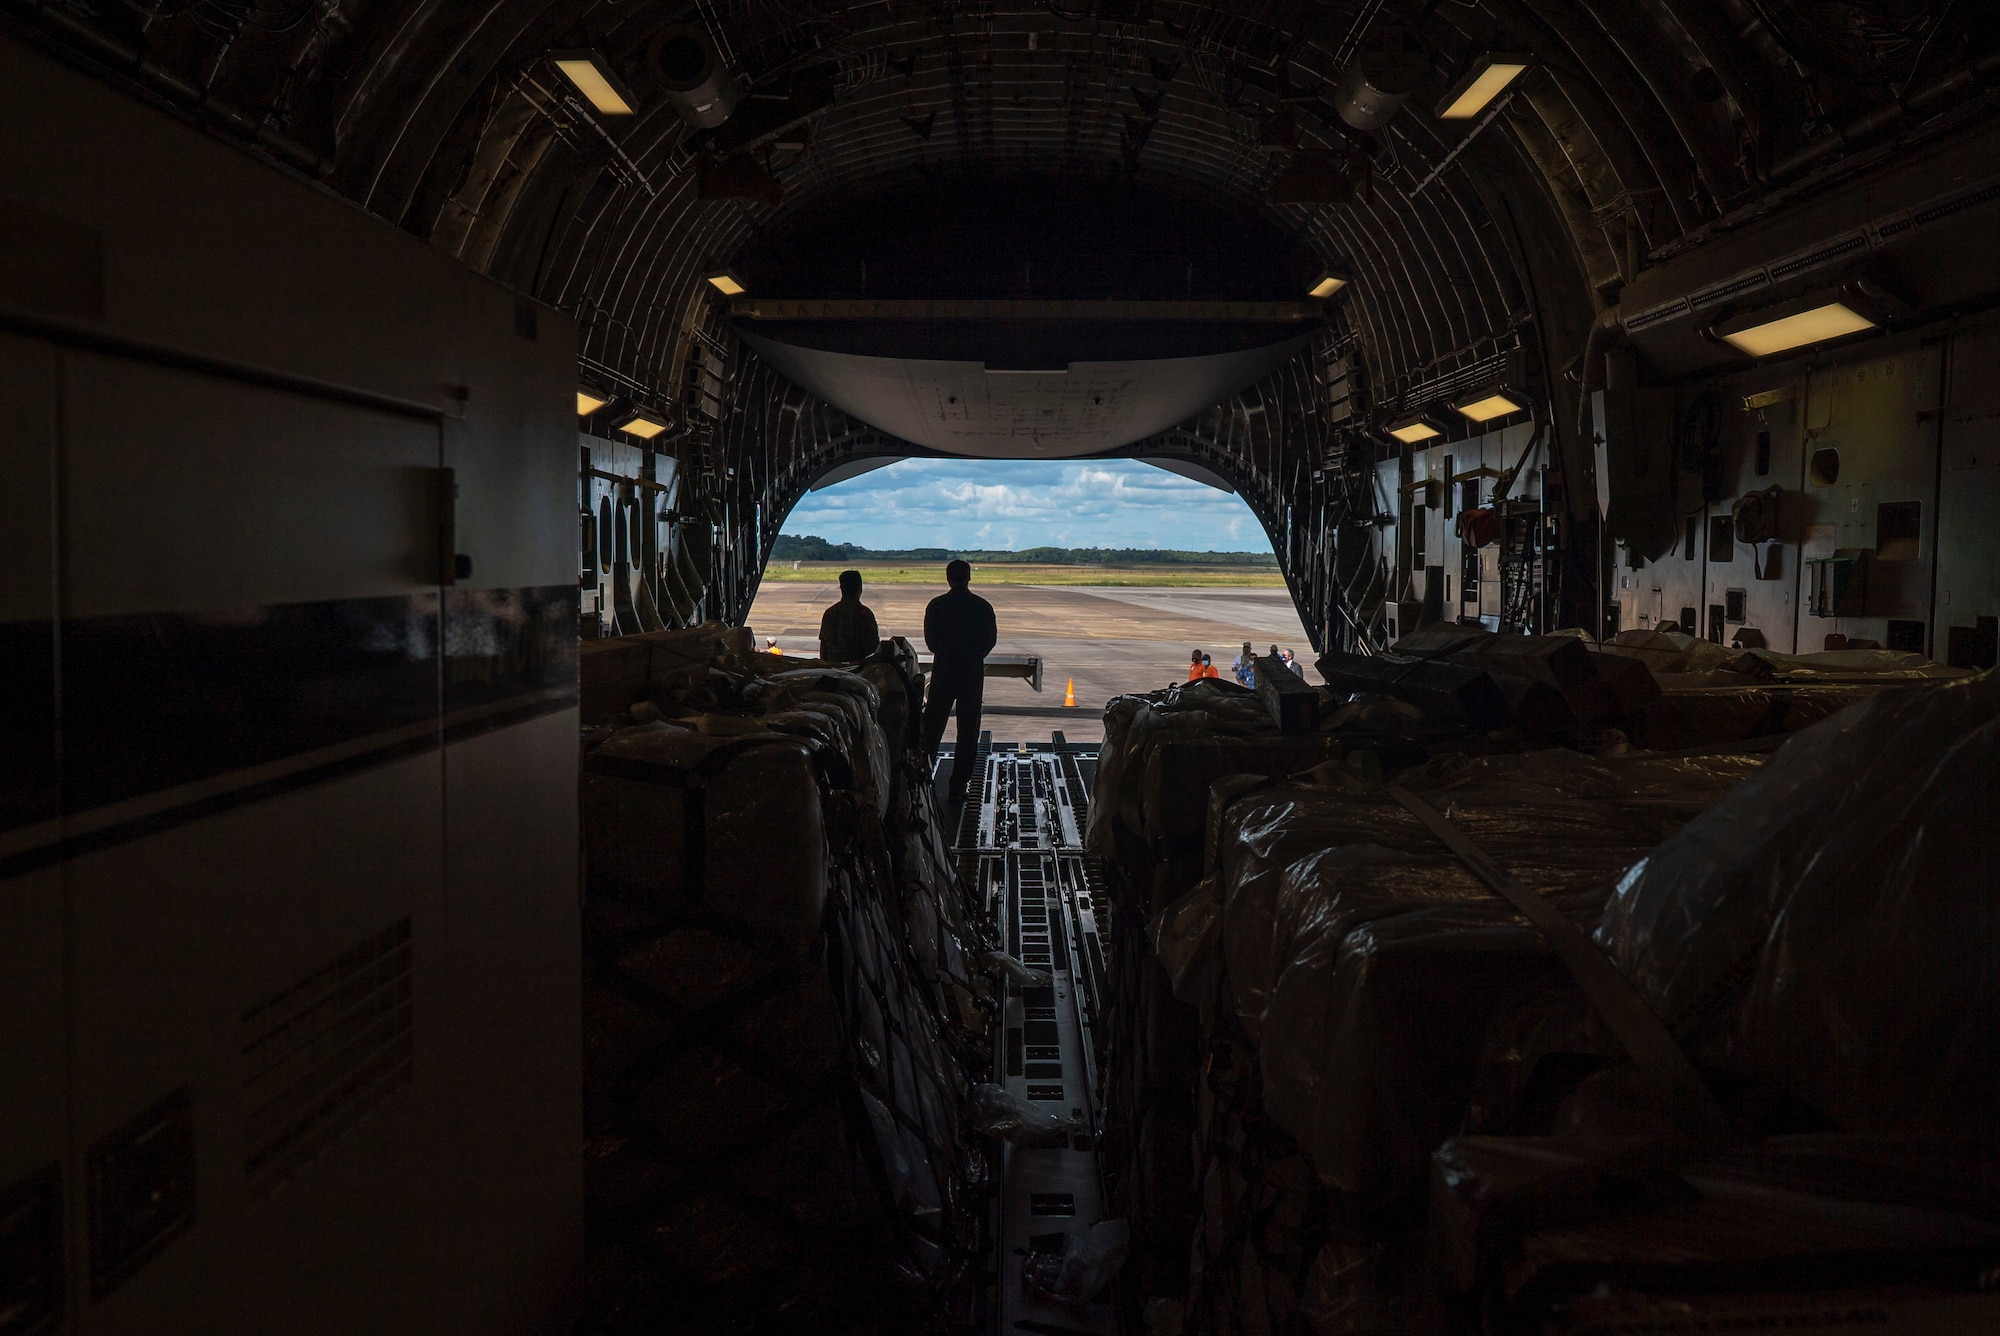 U.S. Air Force personnel and Surinamese locals unload field hospital equipment at Johan Adolf Pengel International Airport, Suriname, July 16, 2021.